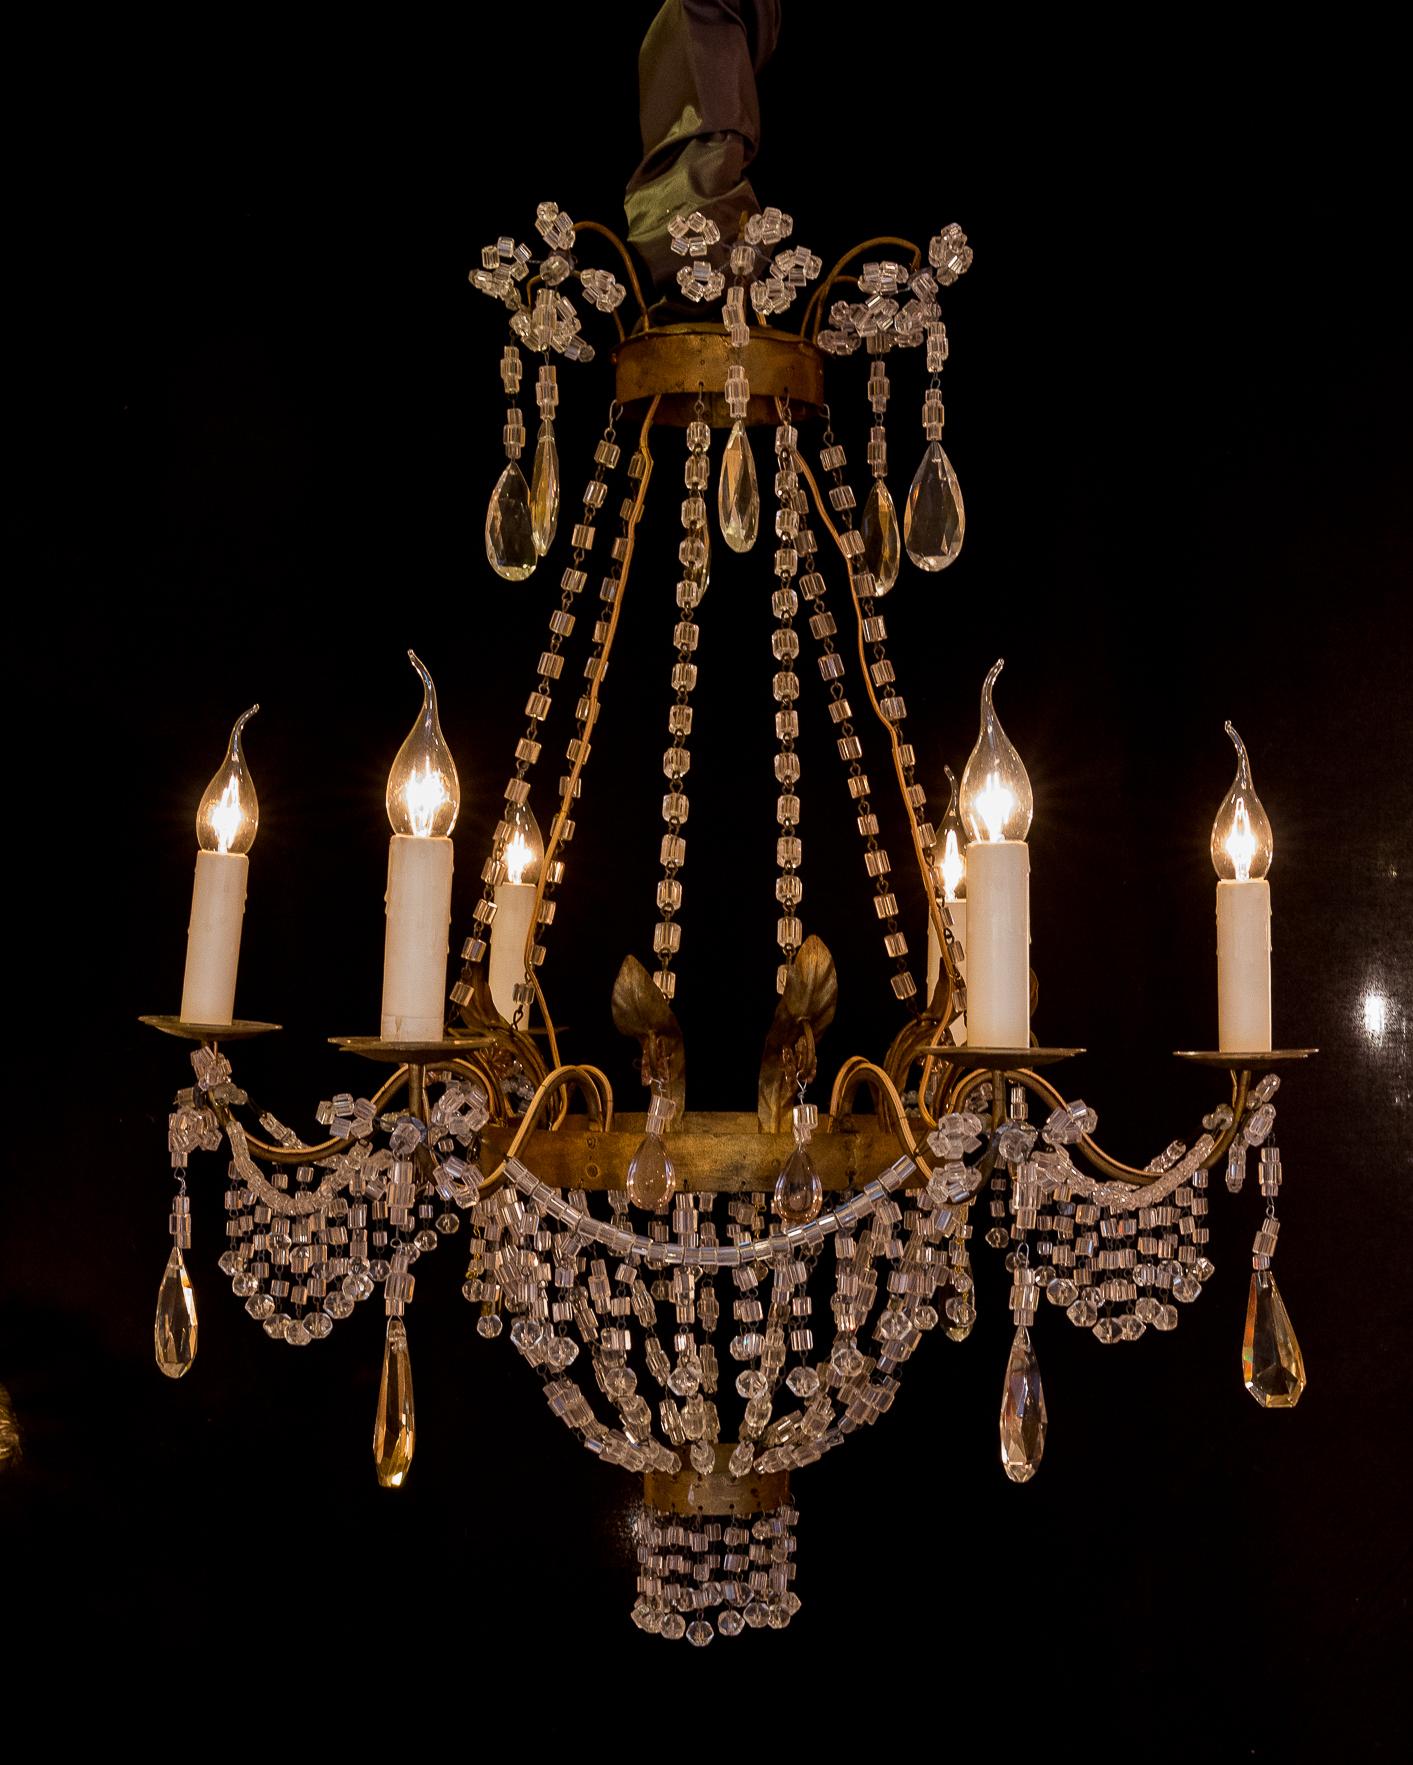 Pair of small chandeliers, brass and handcut crystal, 19th century.

An elegant and decorative small pair of basket chandeliers, in guilt-brass and handcut crystal, in the Classic Empire style. Fine quality cut-crystal decoration with pearls